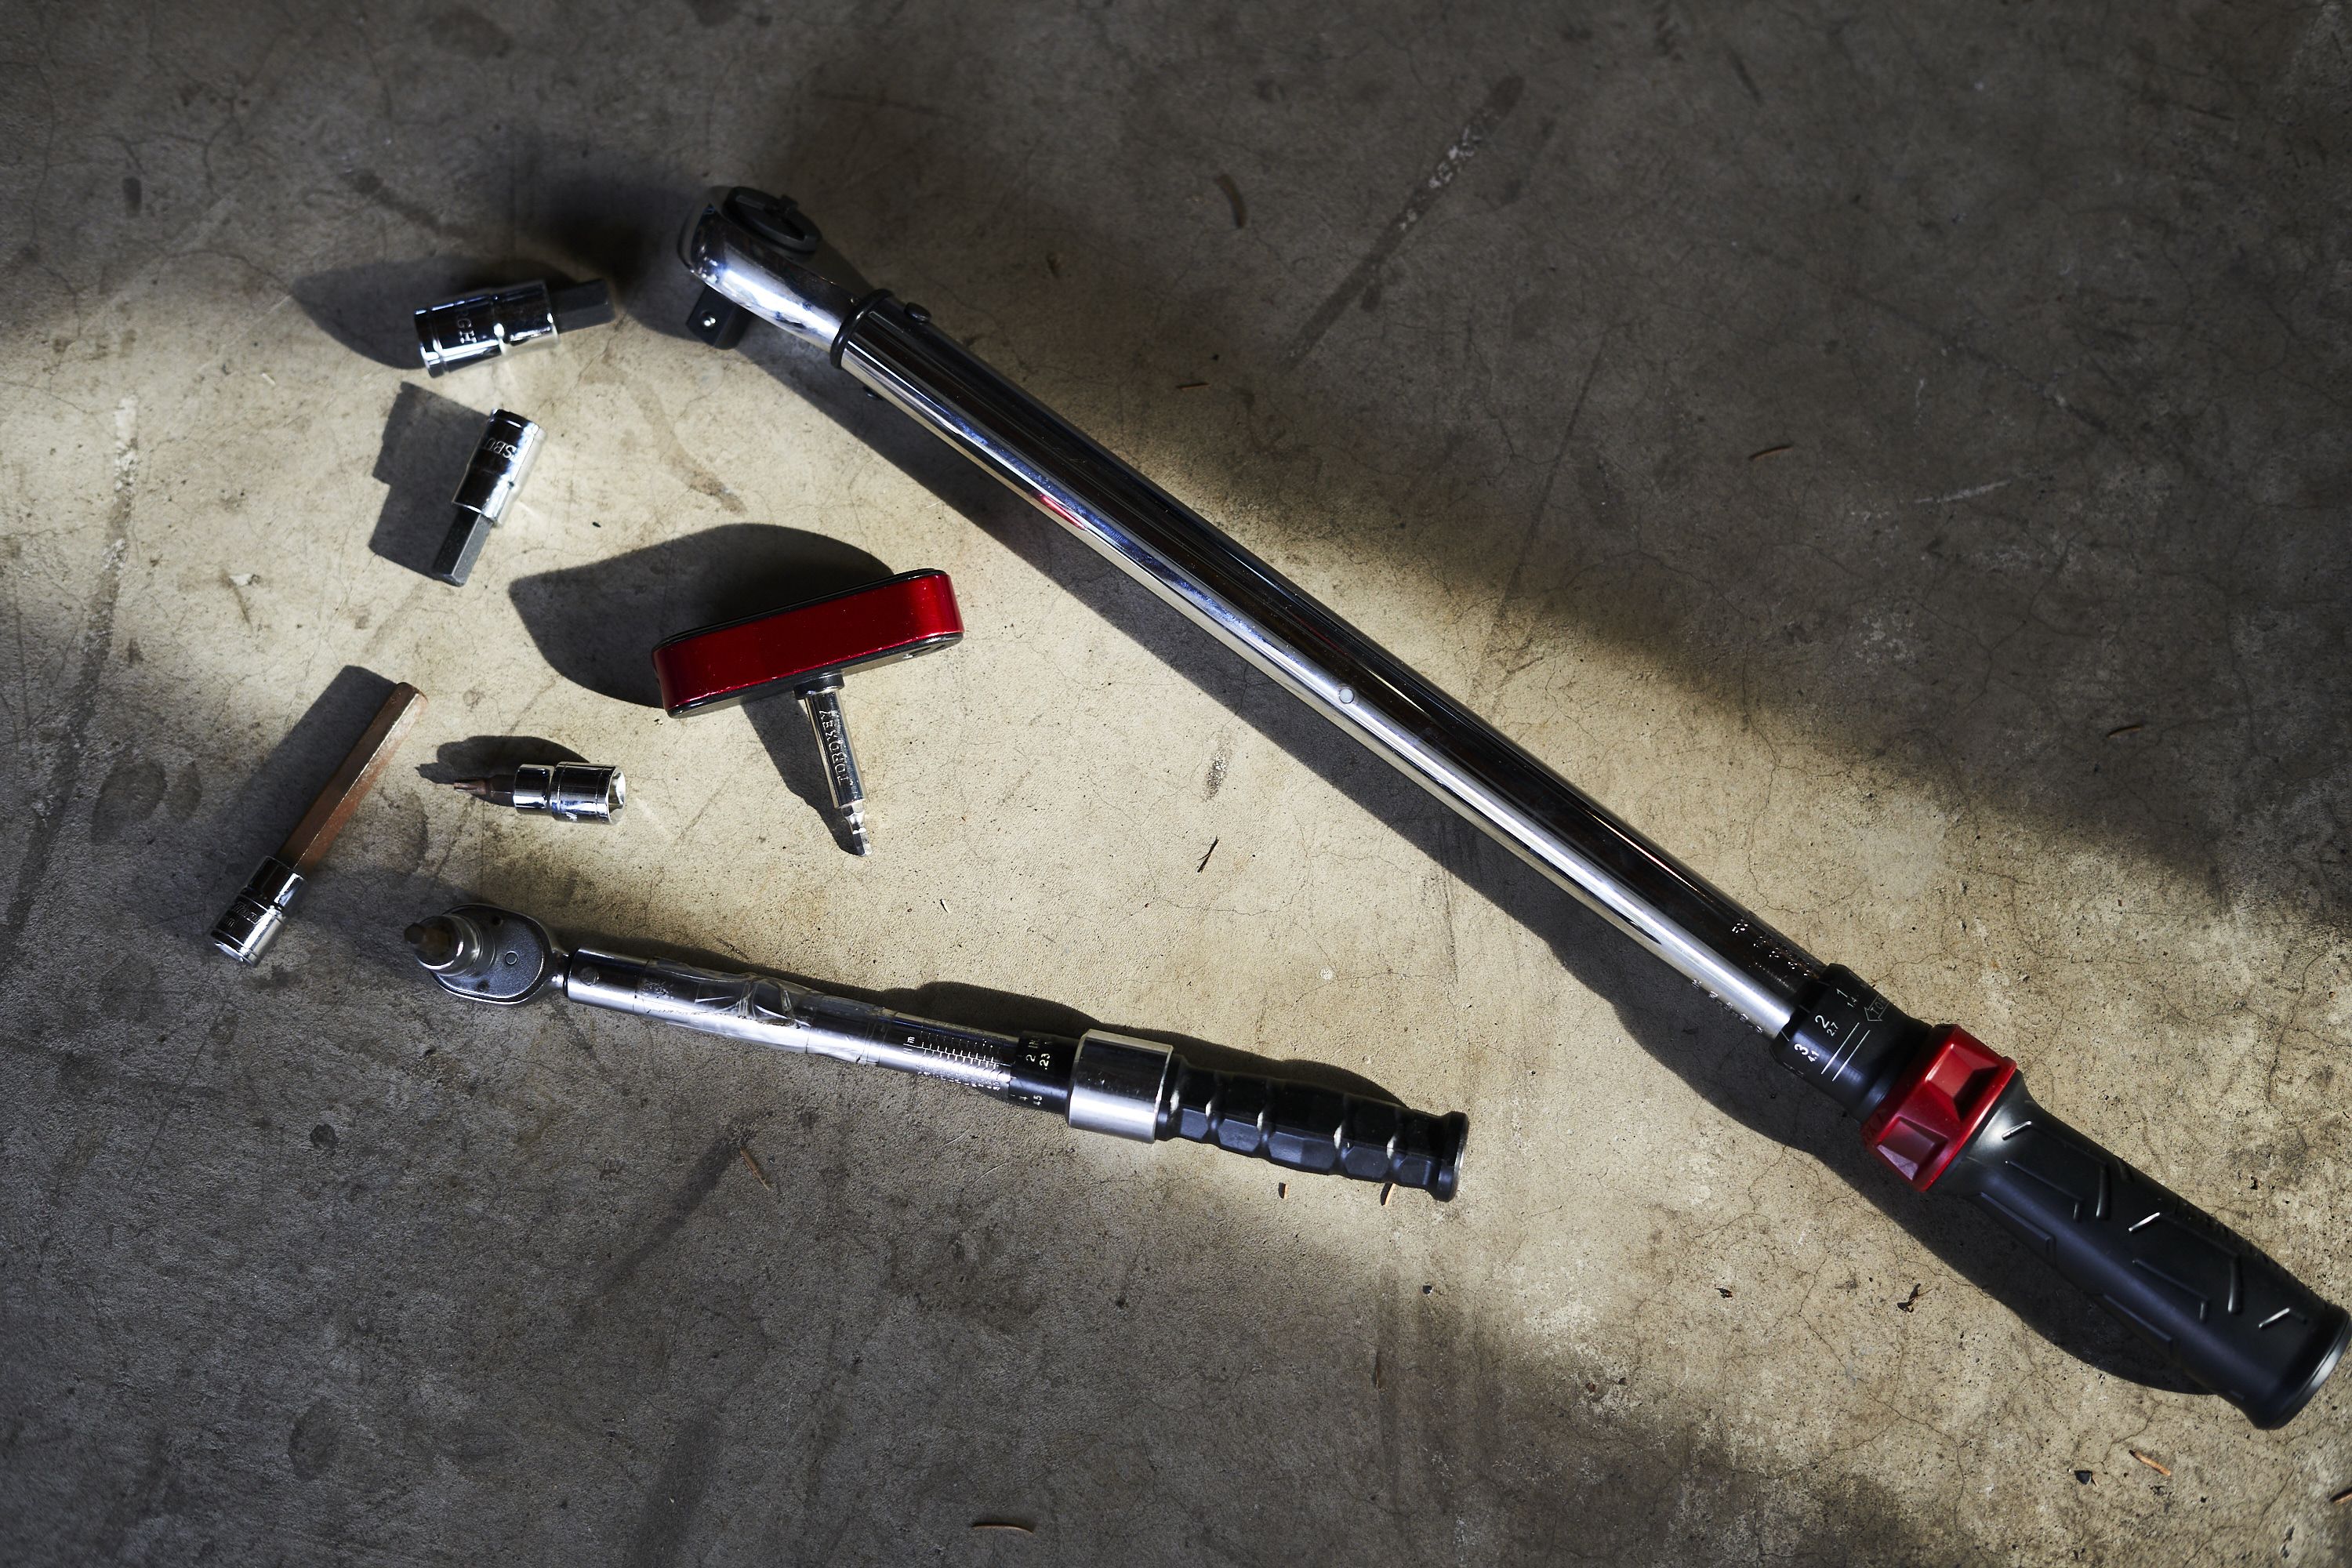 nm torque wrench for bikes